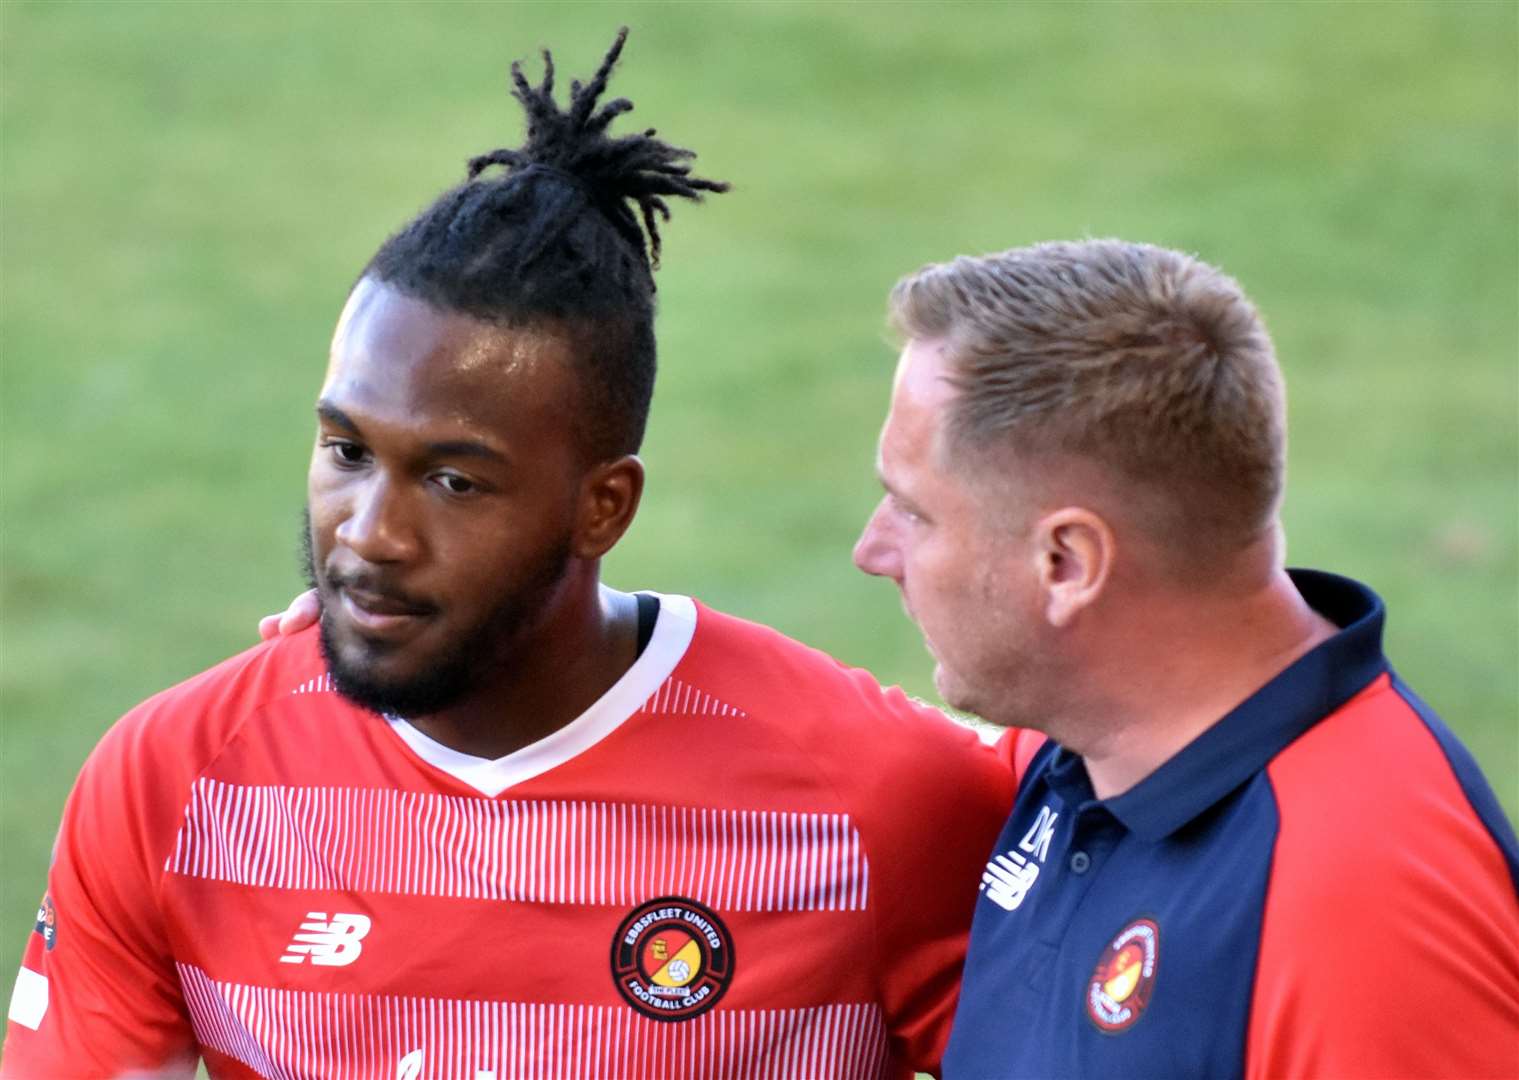 Dennis Kutrieb, seen here with striker Dominic Poleon, enjoyed good relationships with his players. Picture: Ed Miller/EUFC